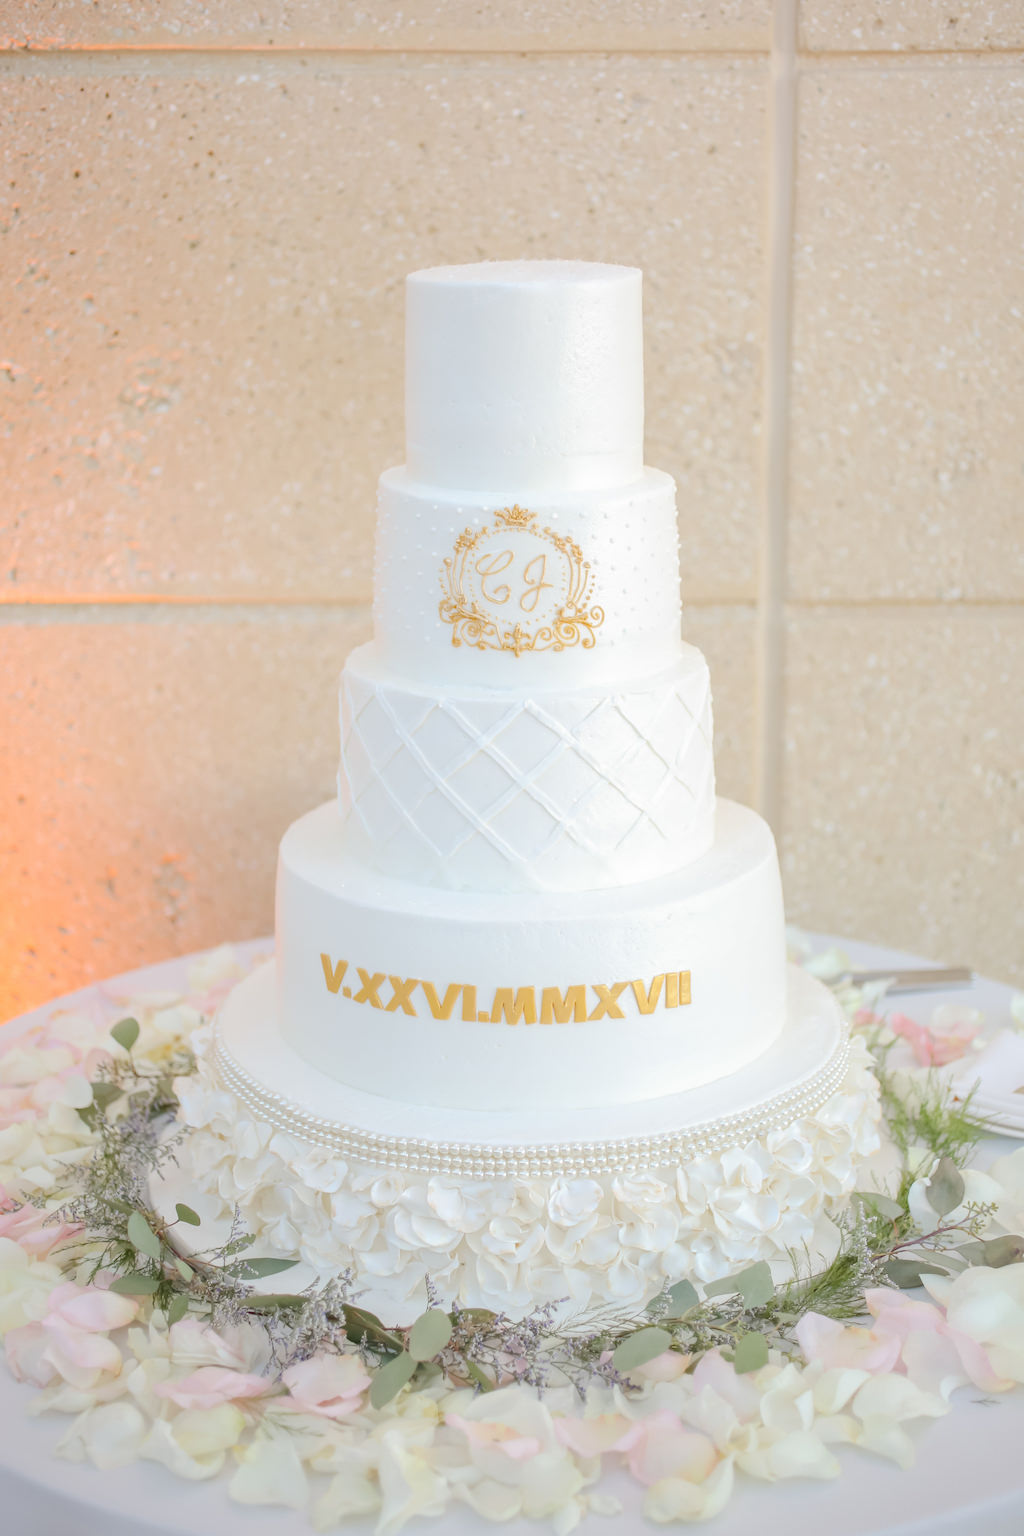 4 Tier Elegant and Simple White Wedding Cake with Gold Monogram and Wedding Date on Floral Stand | St. Petersburg Photographer Lifelong Photography Studios | Tampa Bay Catering and Cake Olympia Catering